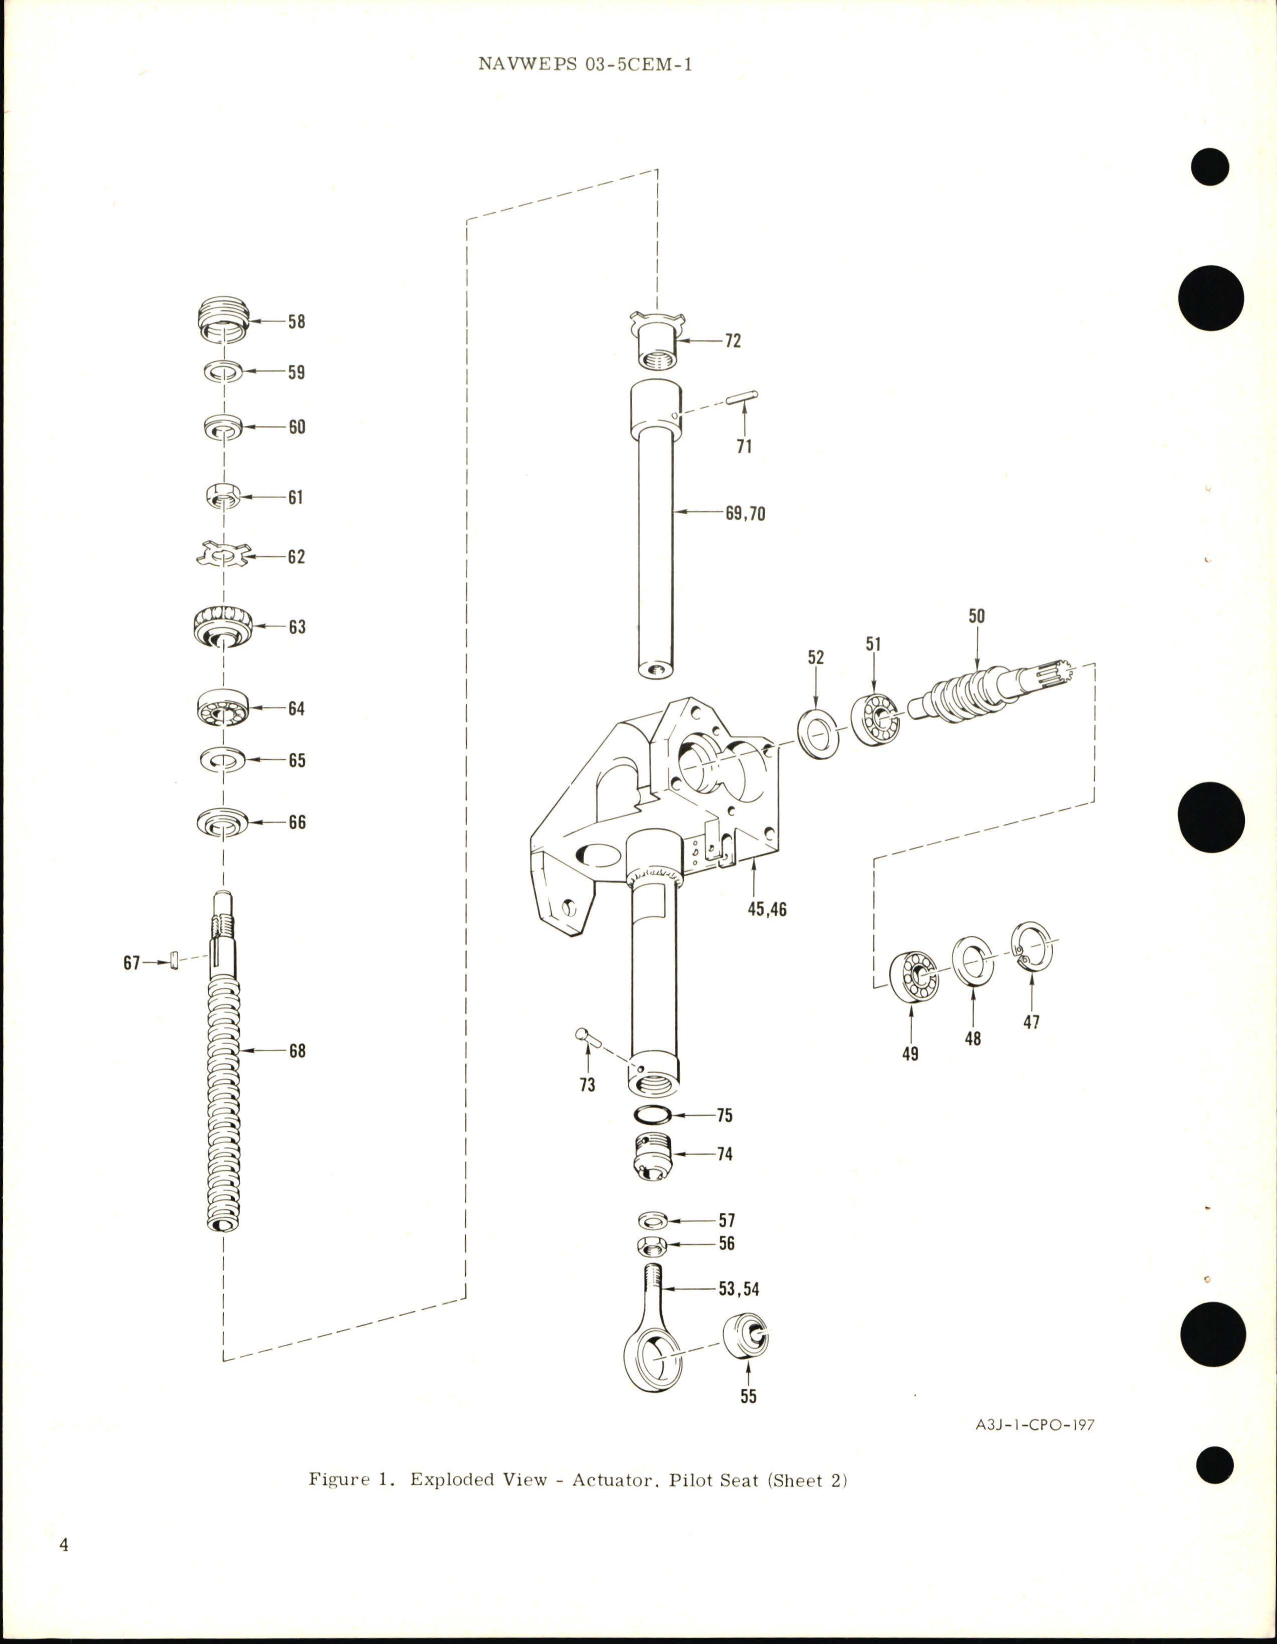 Sample page 6 from AirCorps Library document: Overhaul Instructions with Parts Breakdown for Pilot Seat Actuator - Part 43800-3 